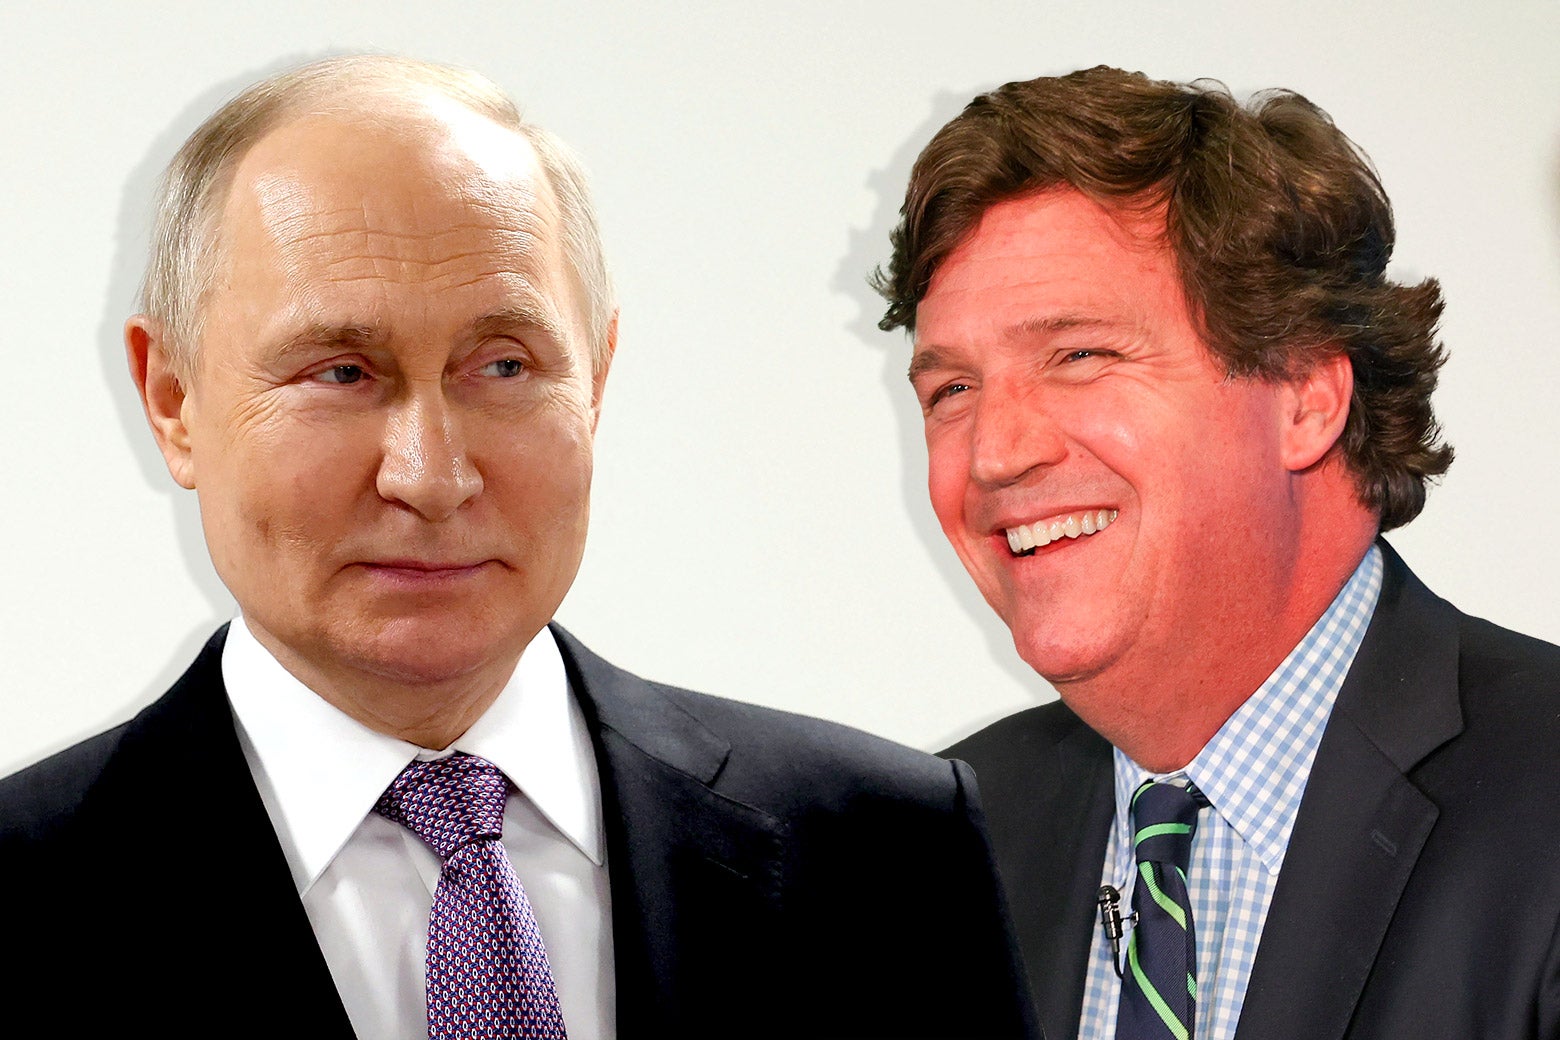 Two separate images of Putin and Tucker Carlson placed side by side. Putin has a wry smile on his face and Tucker has a huge goofy grin.